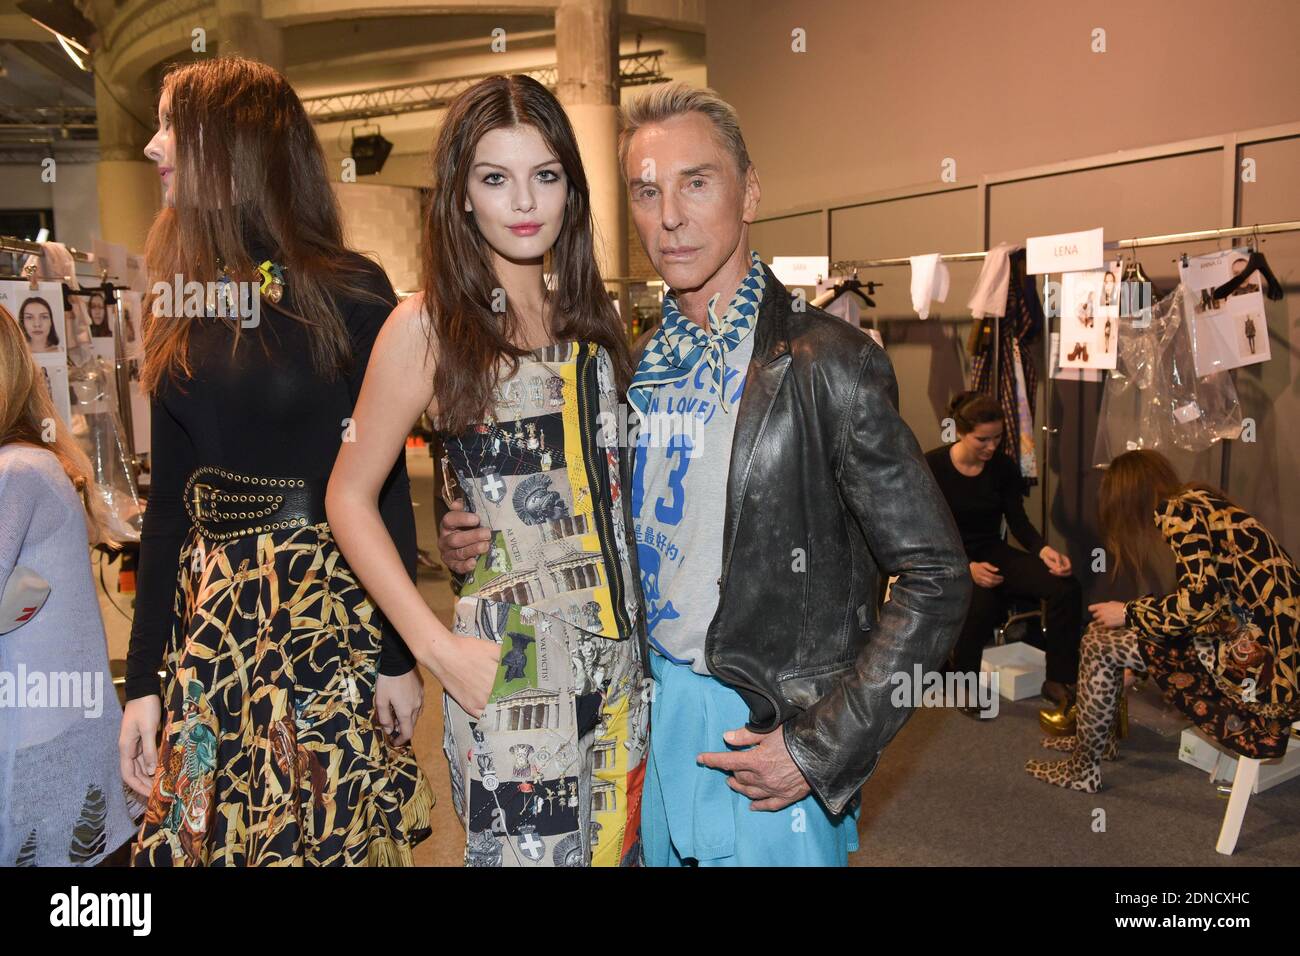 German designer Wolfgang Joop poses with a model backstage ahead of  Wunderkind Fall/Winter 2015-2016 Ready-to-Wear collection show held at the  Palais de Tokyo in Paris, France, March 9, 2015. Photo by Laurent